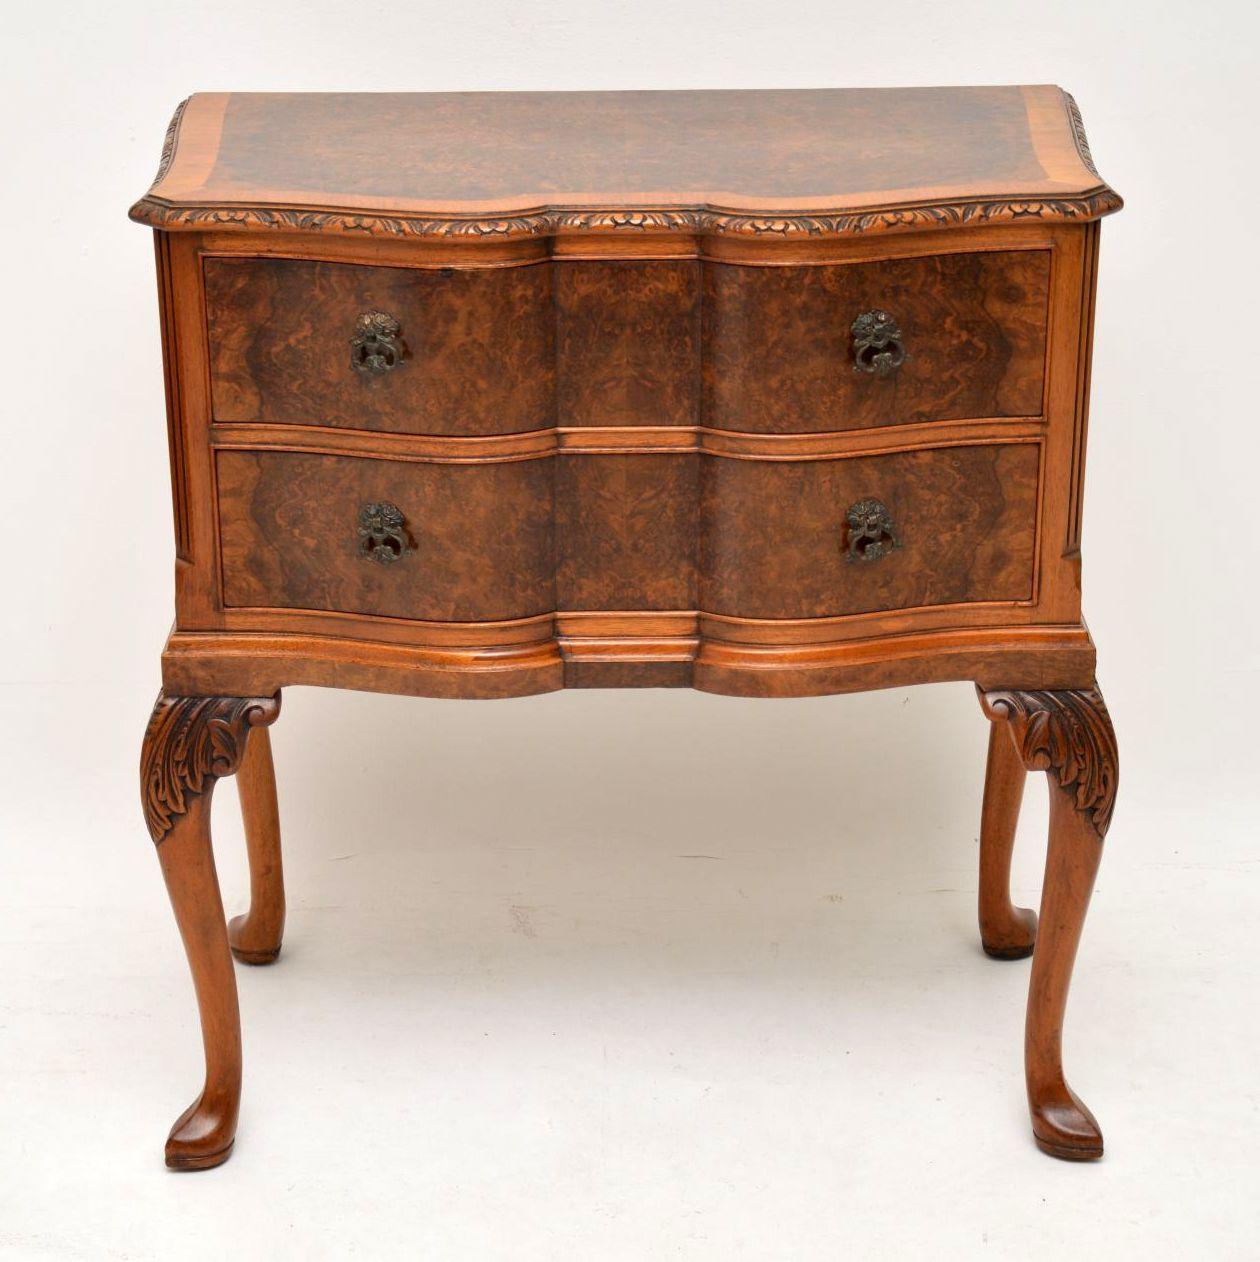 This antique burr walnut side table has two drawers, so I’m not sure whether to call is a chest or side table. It has a wonderful double serpentine shaped front. The top is burr walnut with a crossbanded border and the top edges are well carved. The